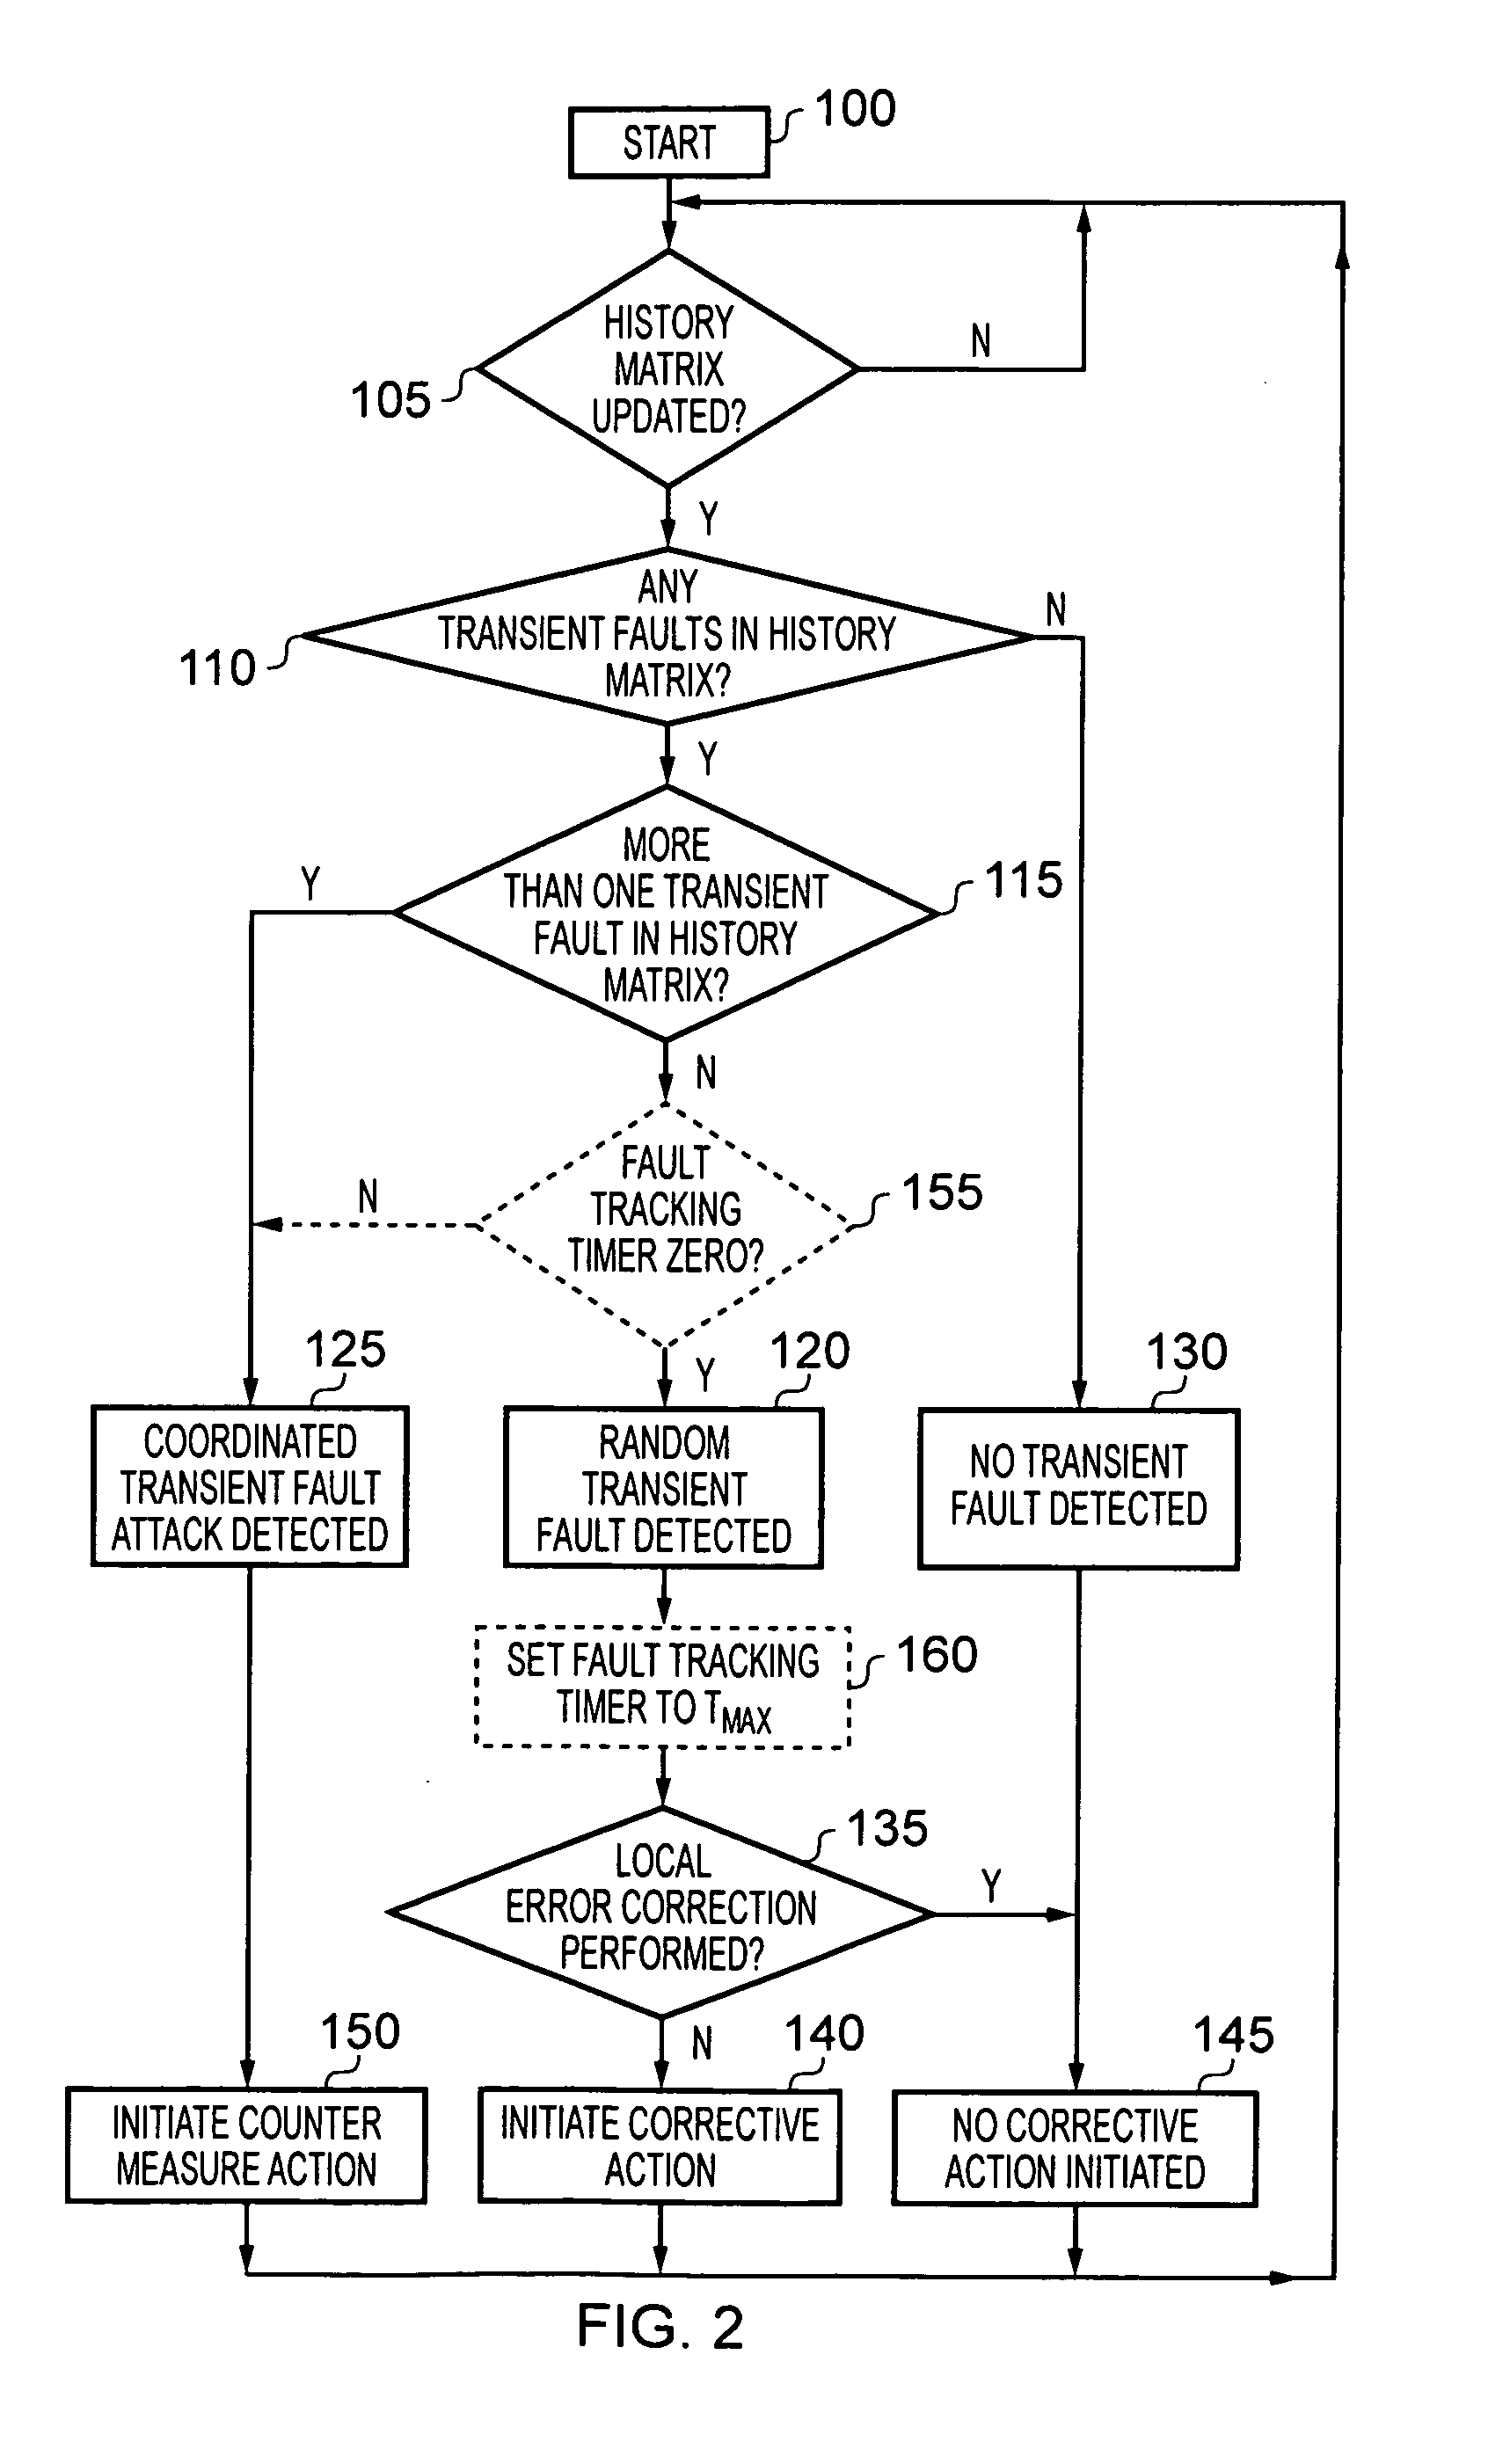 Data processing apparatus and method for analysing transient faults occurring within storage elements of the data processing apparatus